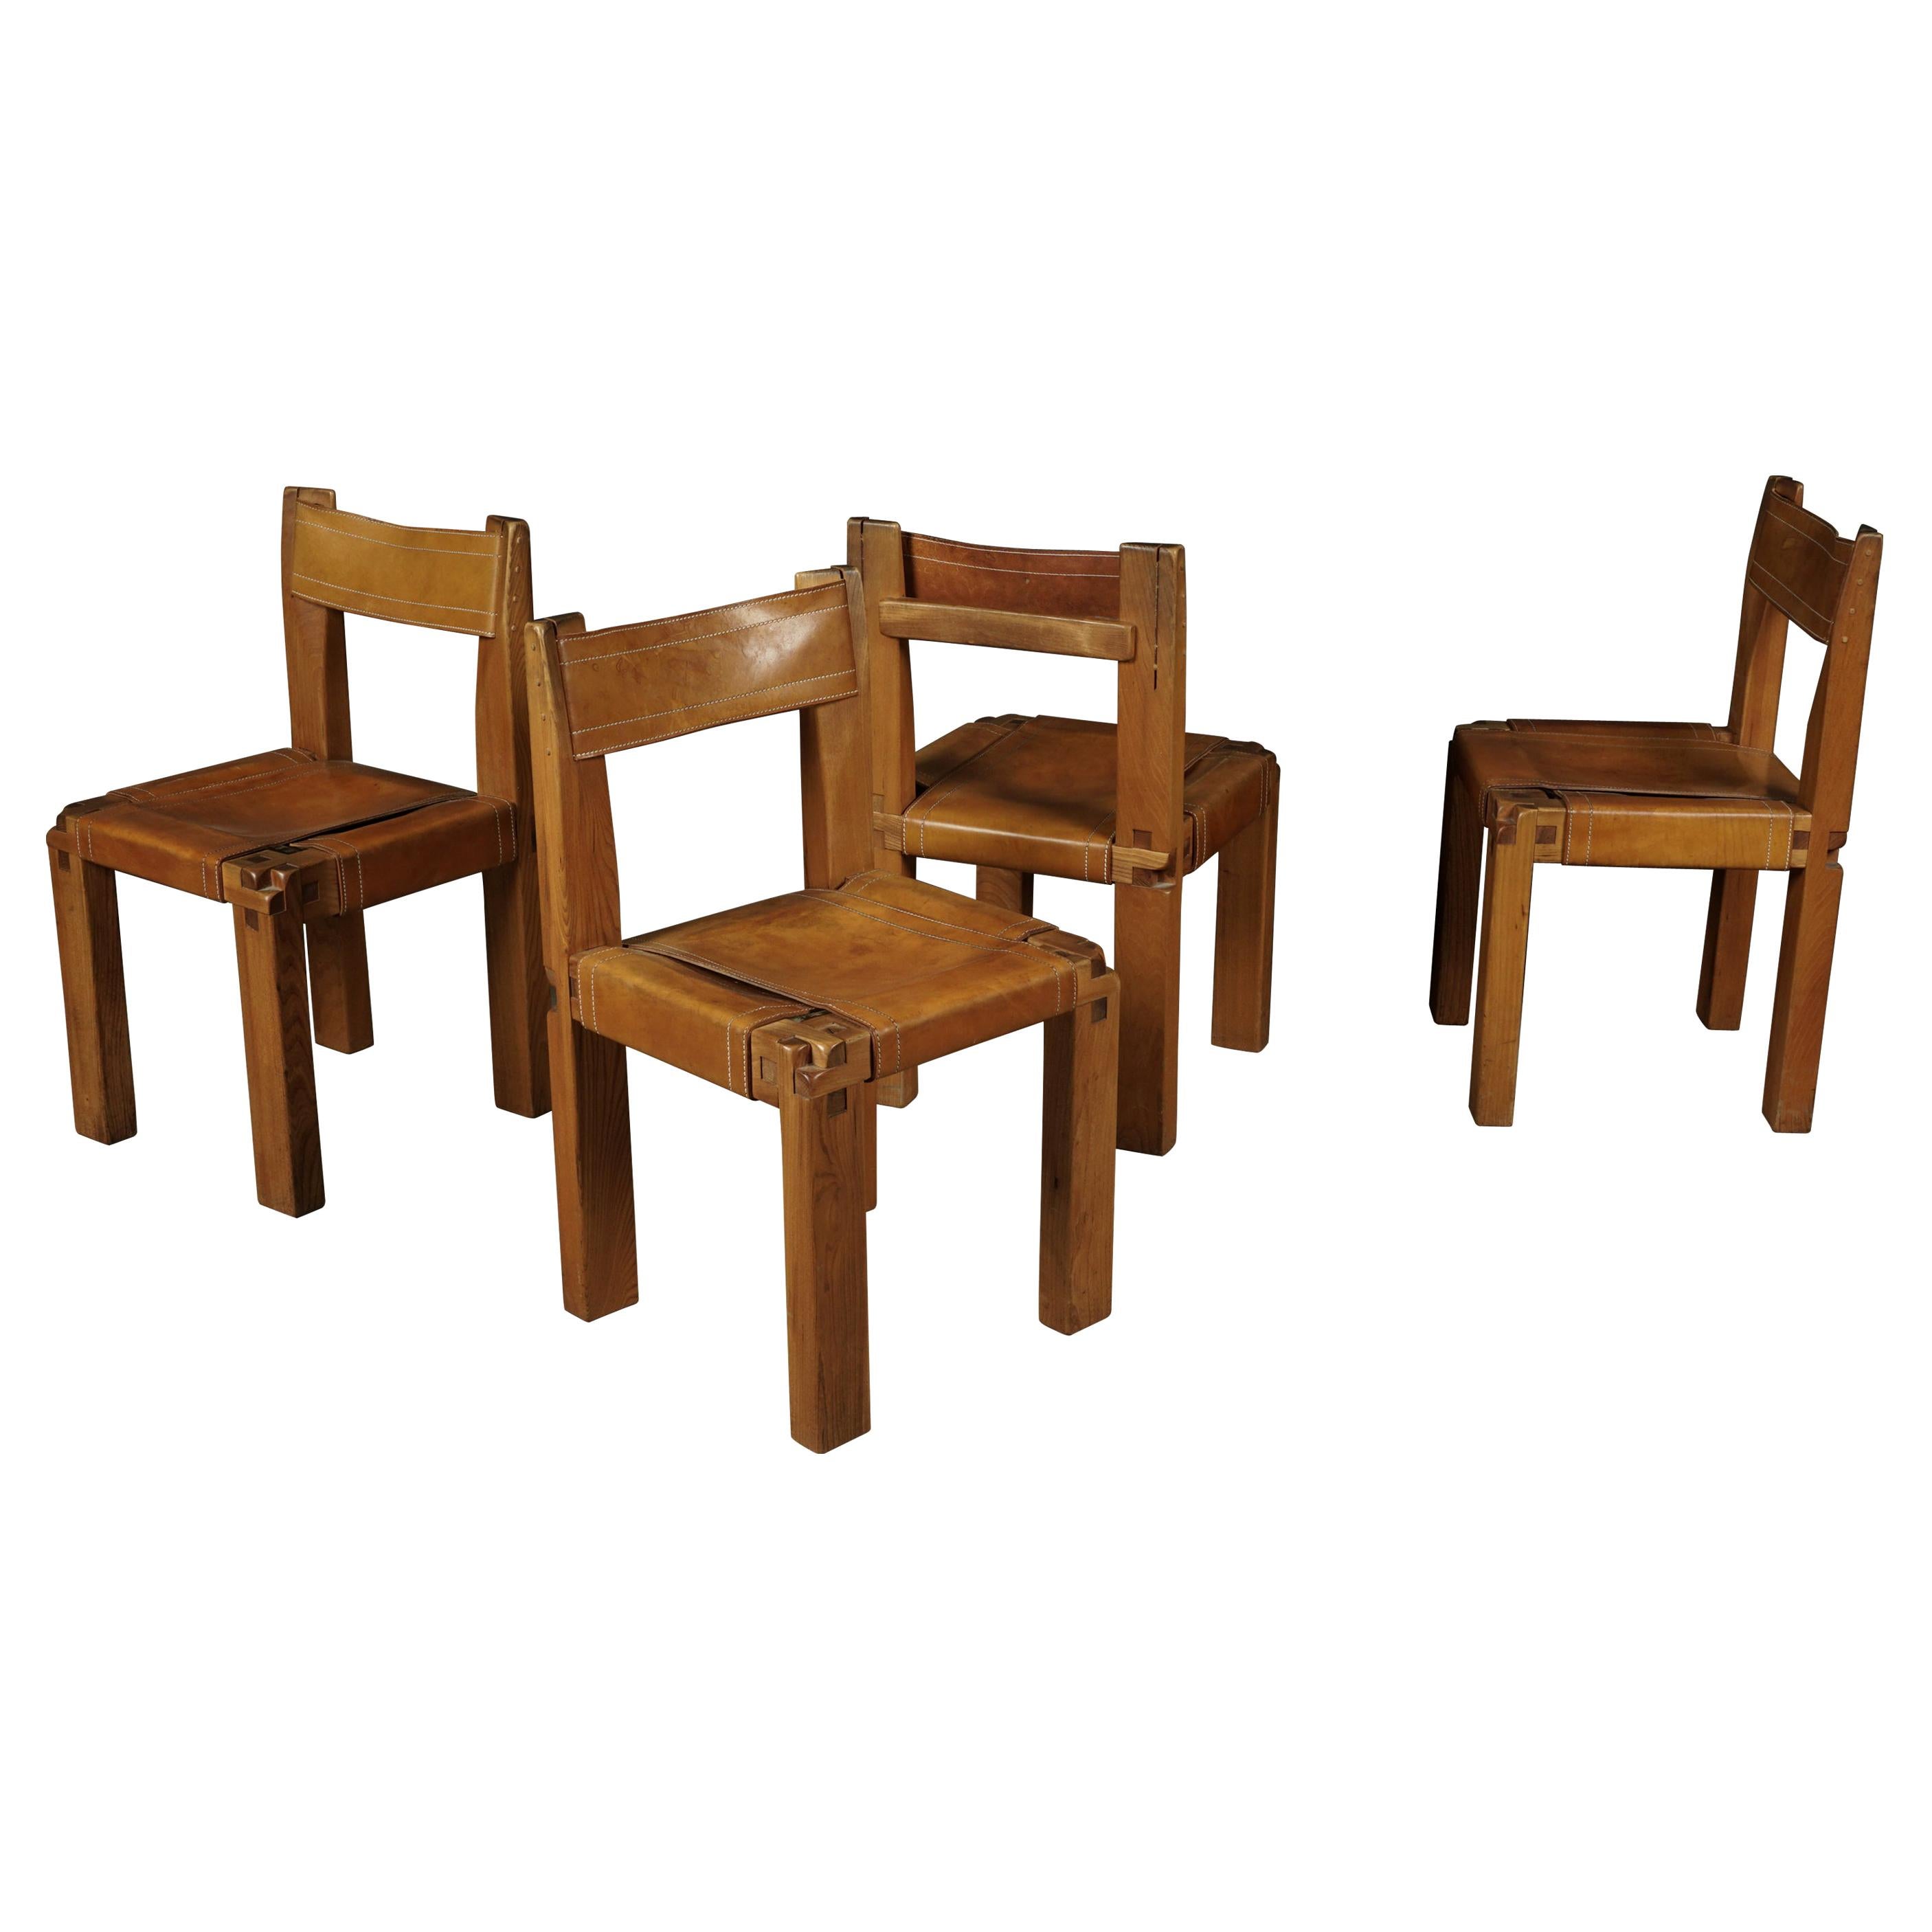 Set of Four S11 Chairs by Pierre Chapo, France, circa 1960